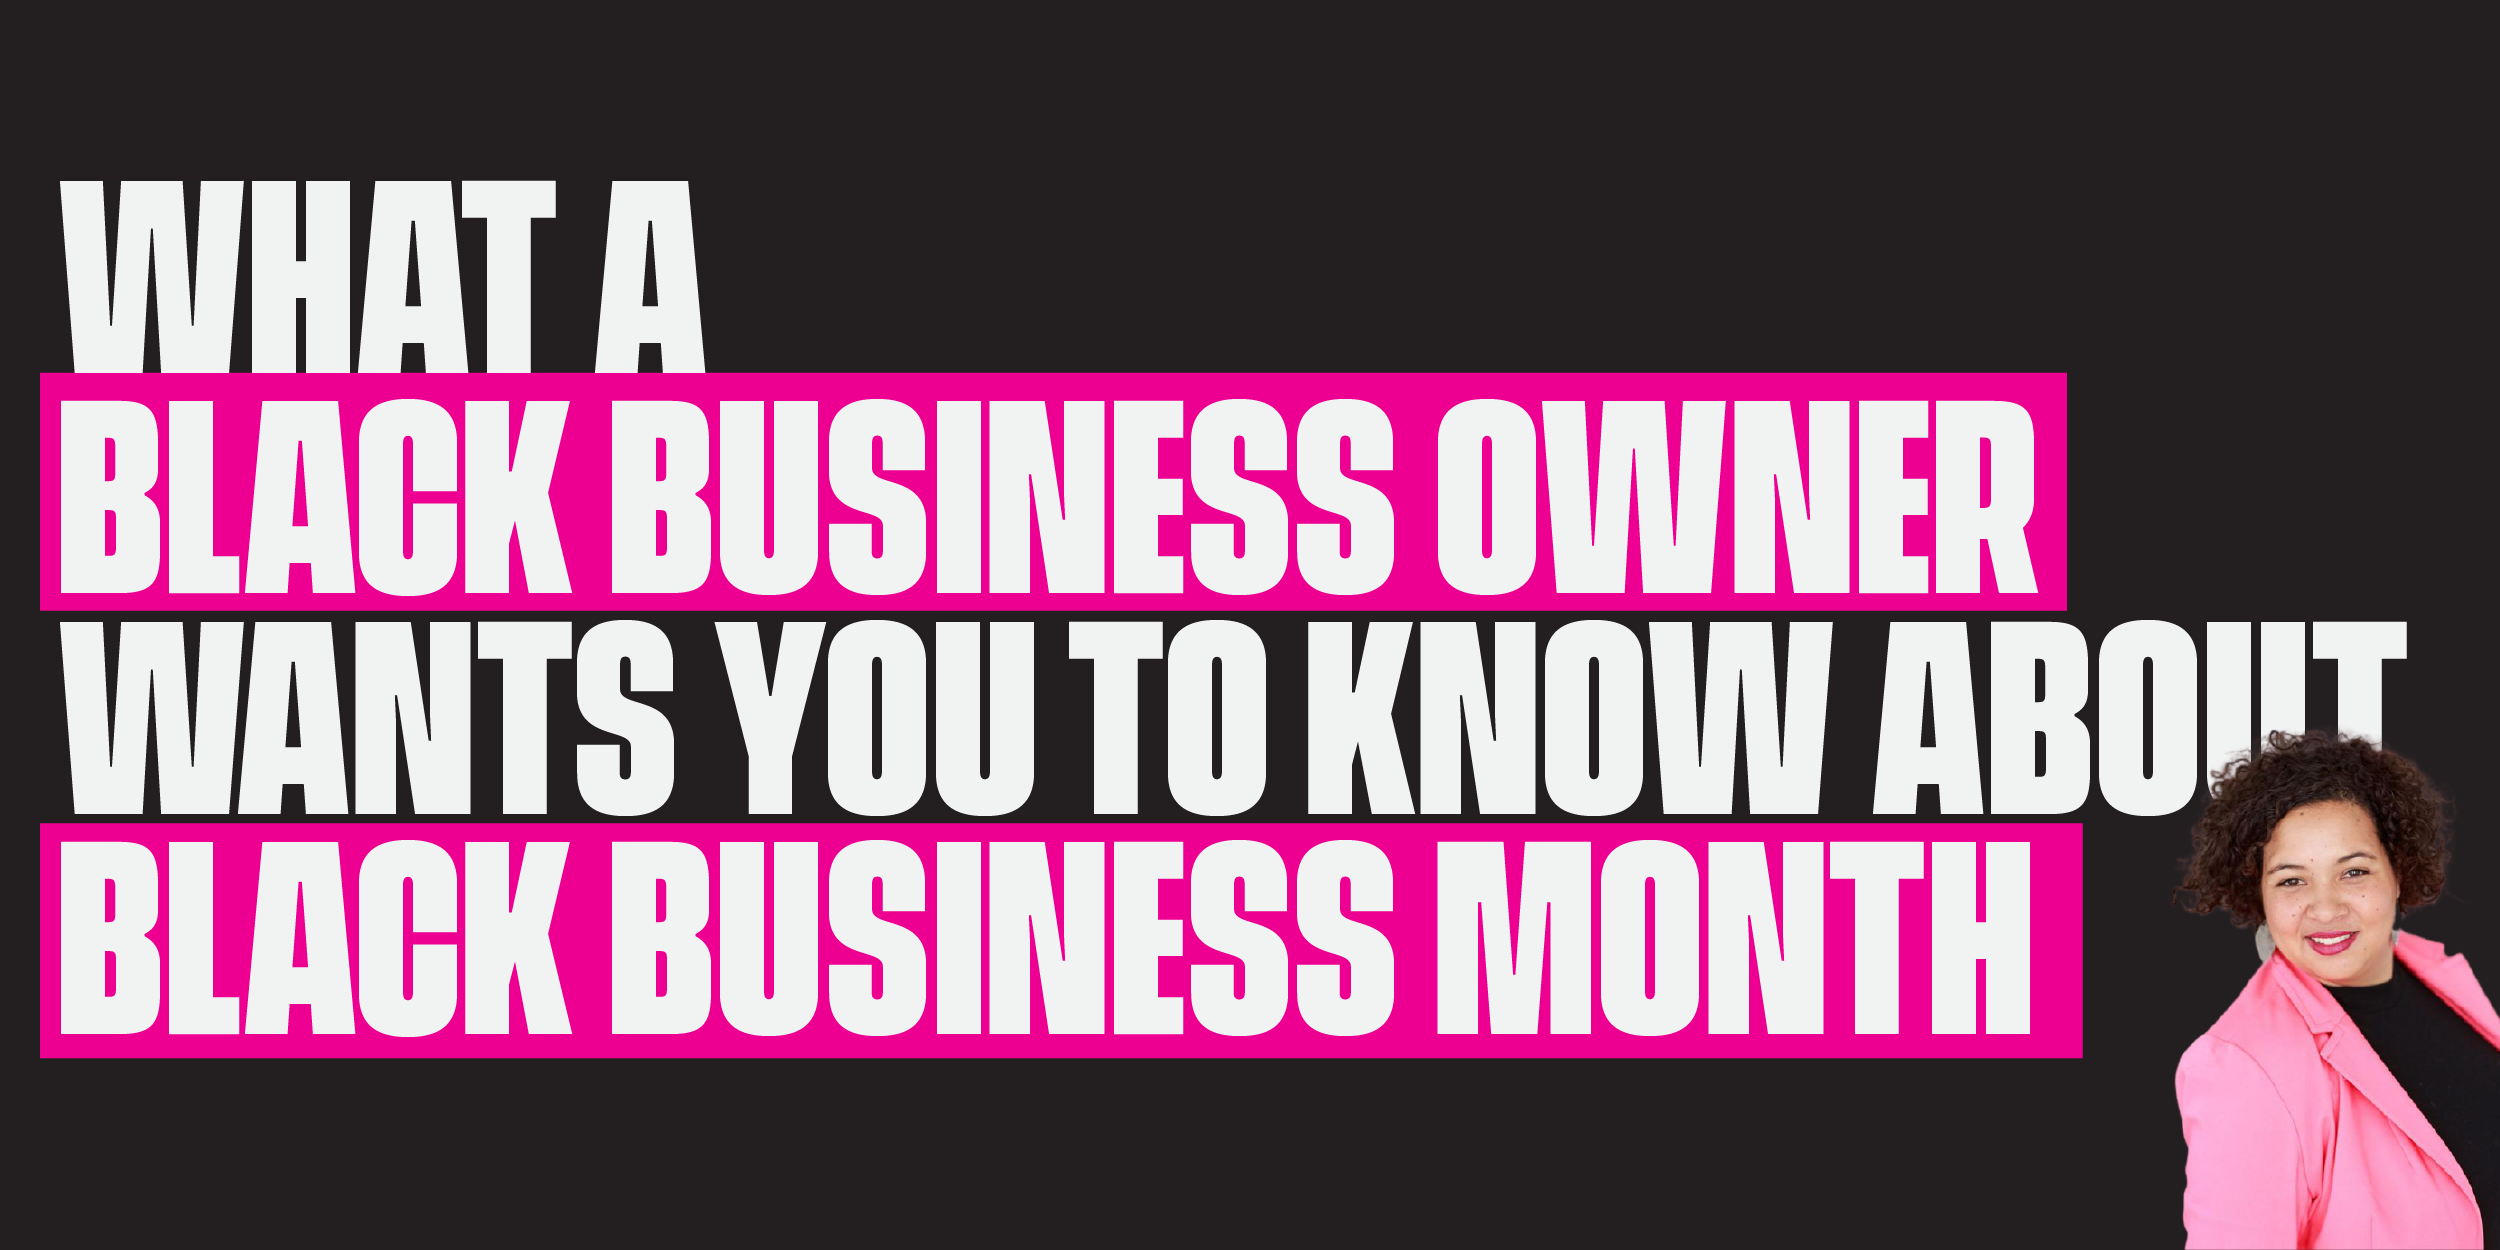 What a Black Business Owner Wants You to Know About Black Business Month